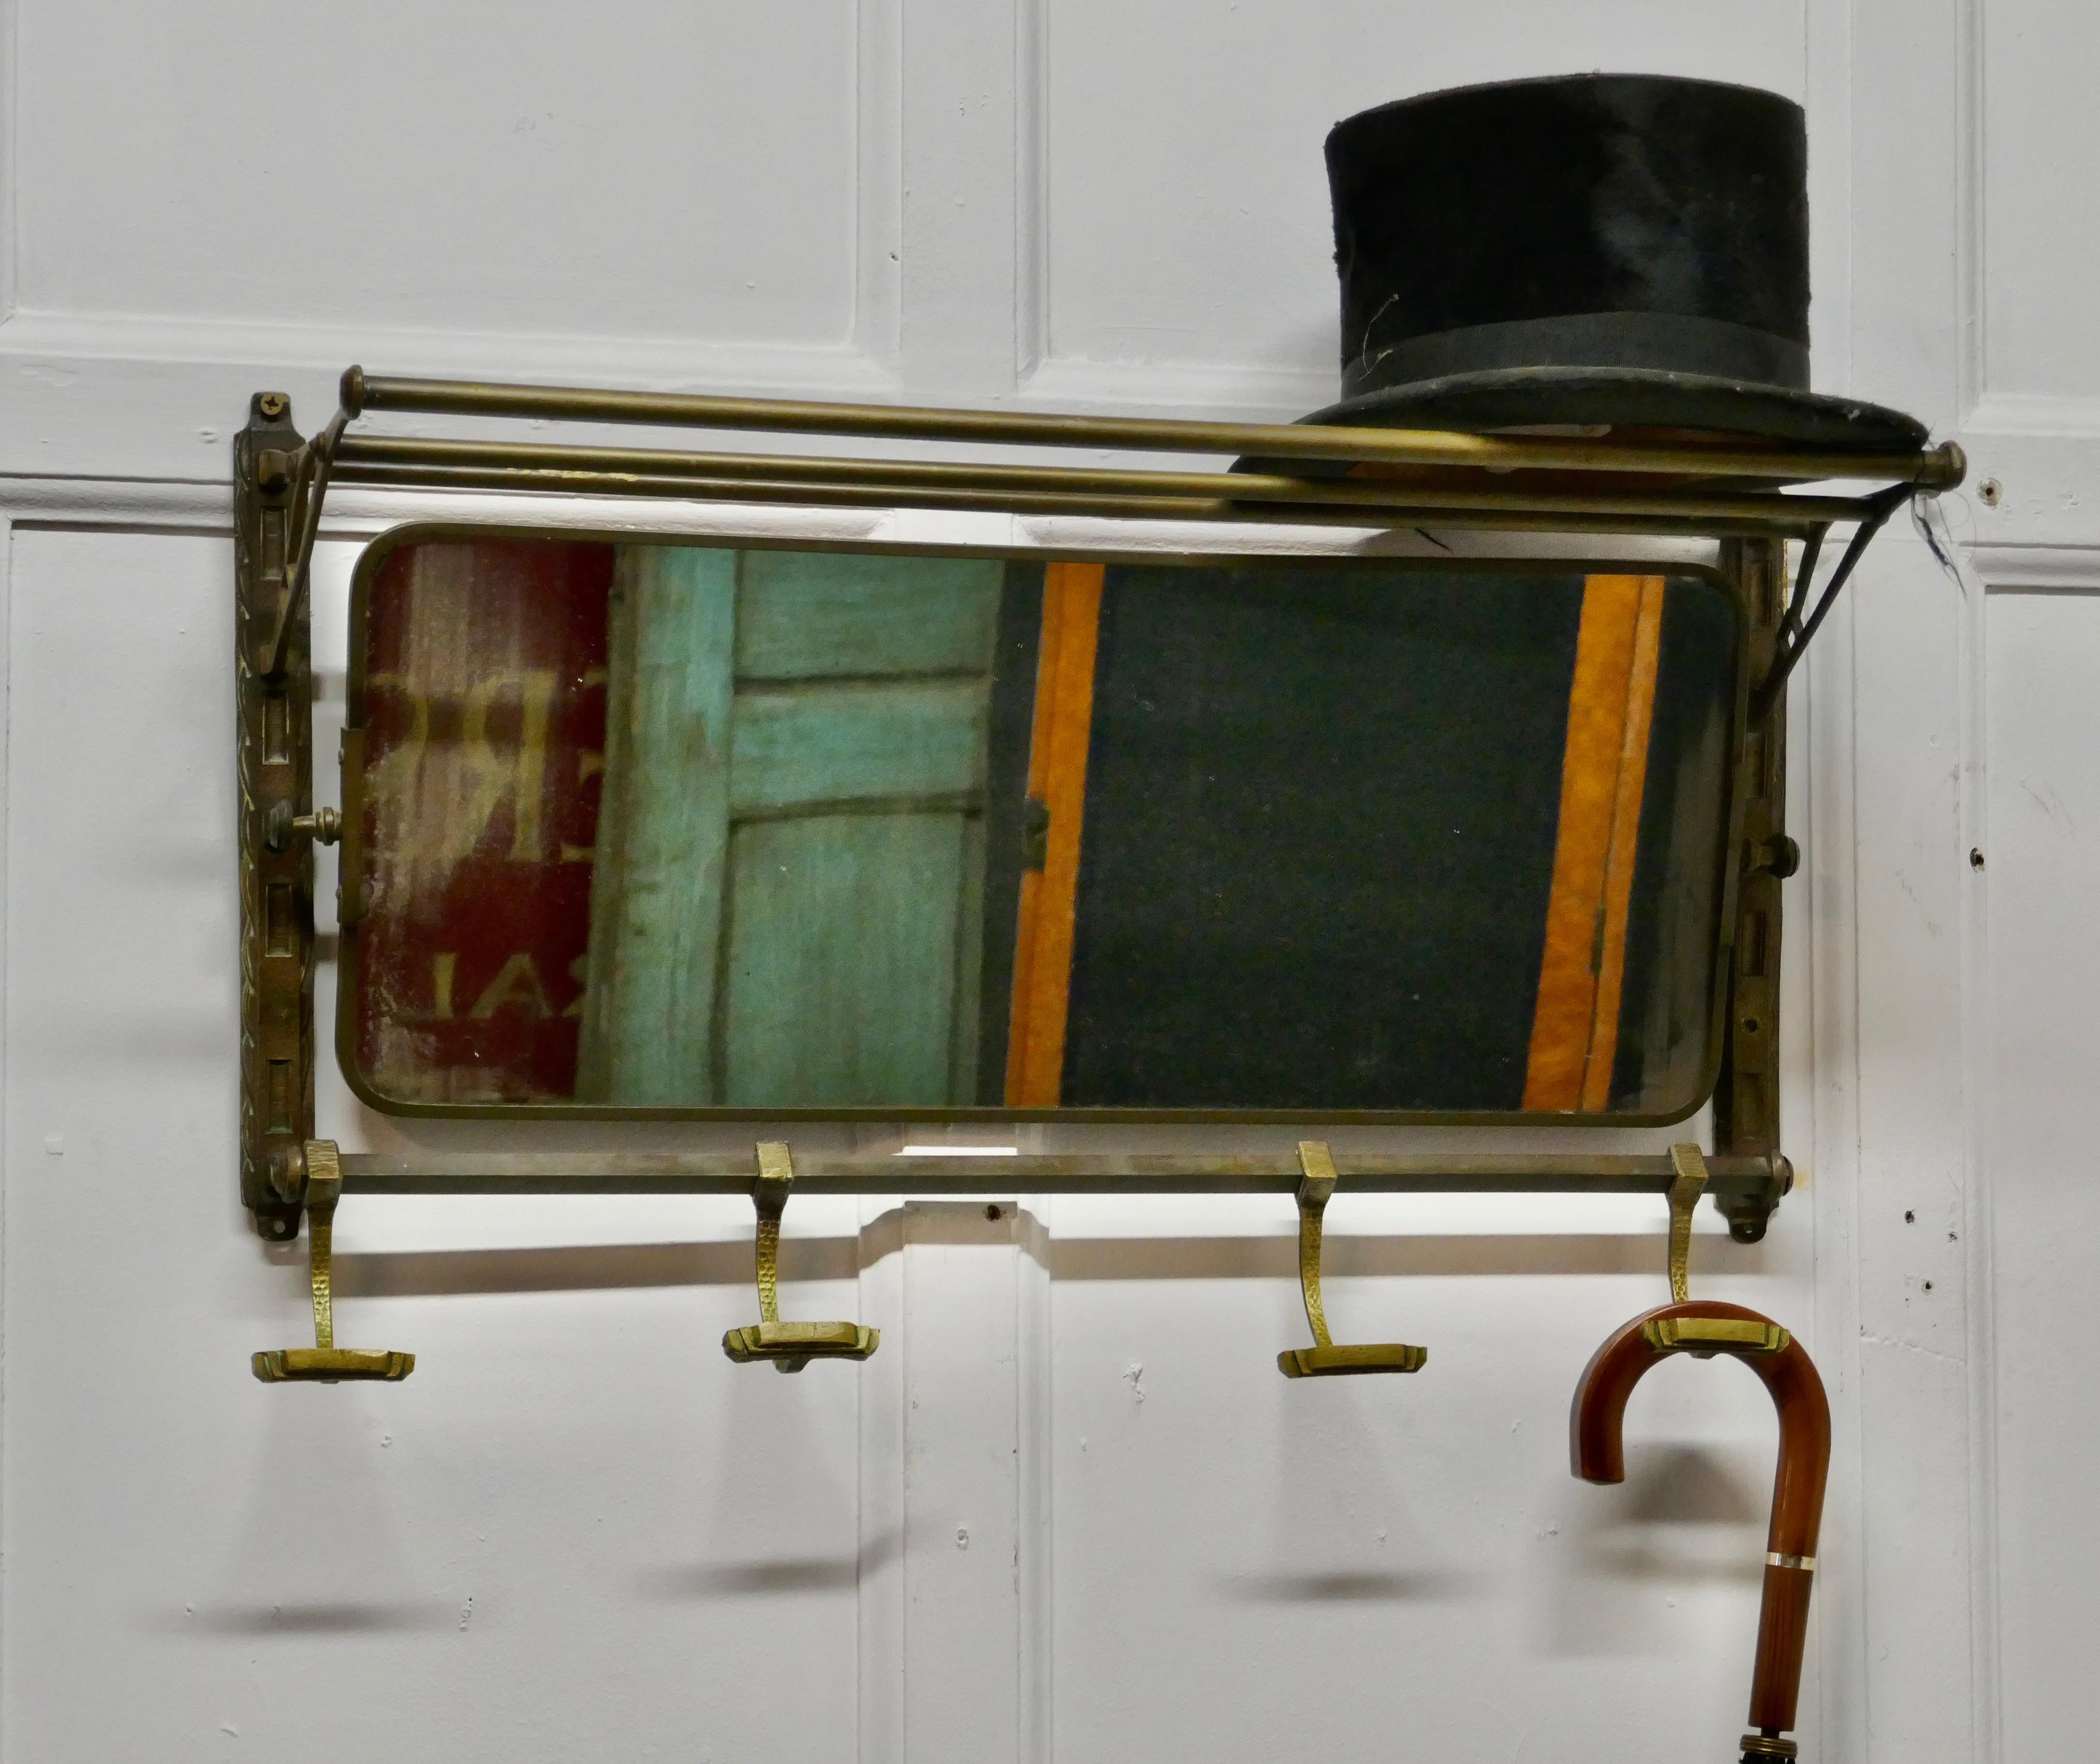 French Art Deco Odeon style Pullman mirror from a train

This Art Deco period brass train rack includes its original swivel mirror that adjusts to the proper angle for viewing, it has 4 sliding hooks and an upper shelf
Originally used in a French